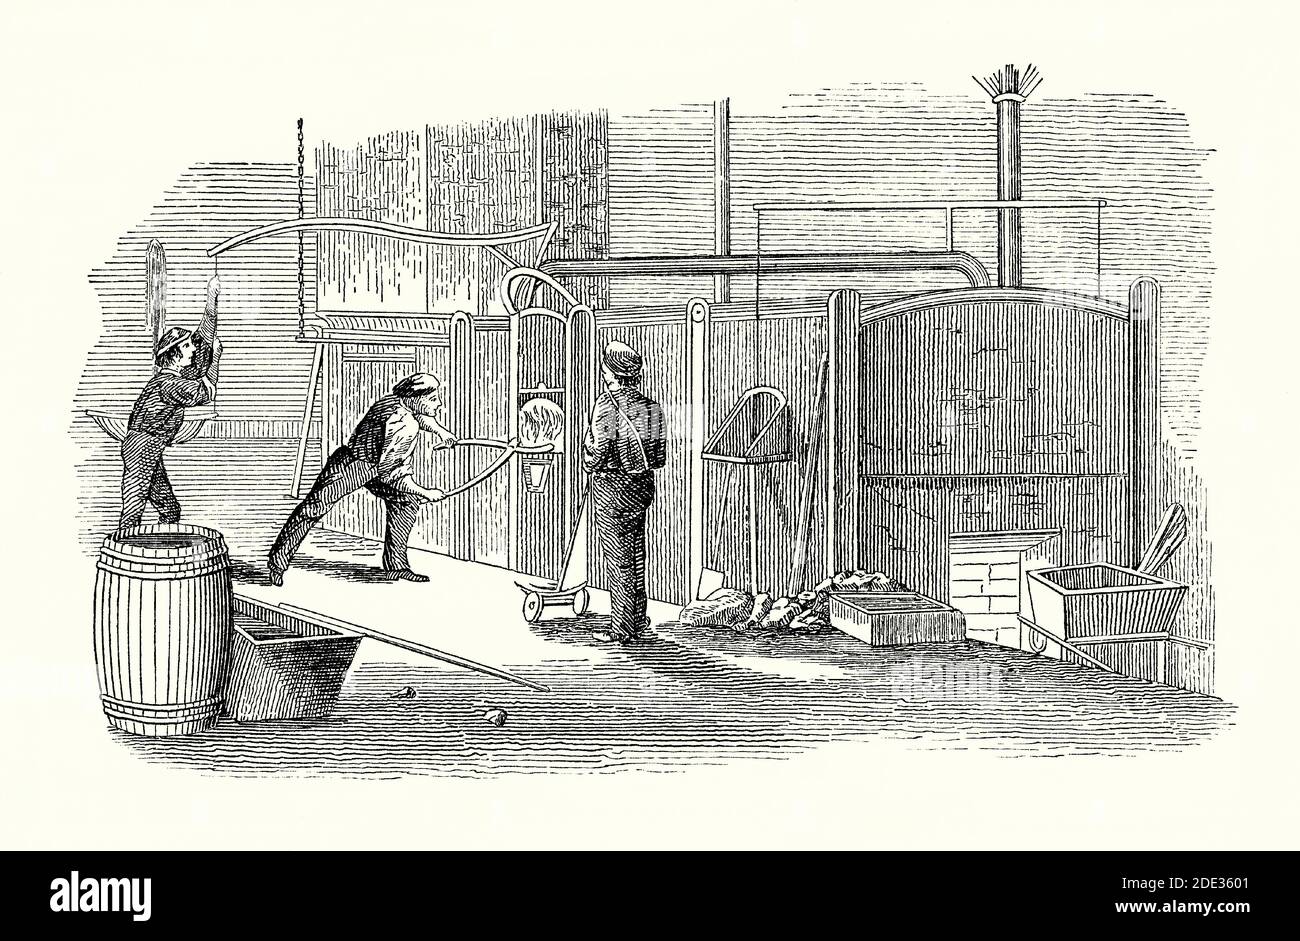 An old engraving of men operating a coal-fired puddling furnace. It is from a Victorian book of the 1880s. Puddling is a process in the manufacture of high-grade iron in or furnace. It was developed in the UK by Abraham Darby II, the Cranage brothers and Peter Onions. This was improved upon by Henry Cort at Fontley, Hampshire, England, UK in 1784. The molten pig iron was stirred in a reverberatory furnace, decarbonising the metal and ridding it of impurities. The result was bar iron (malleable wrought iron). This type of furnace would eventually be used to make good-quality carbon steel. Stock Photo